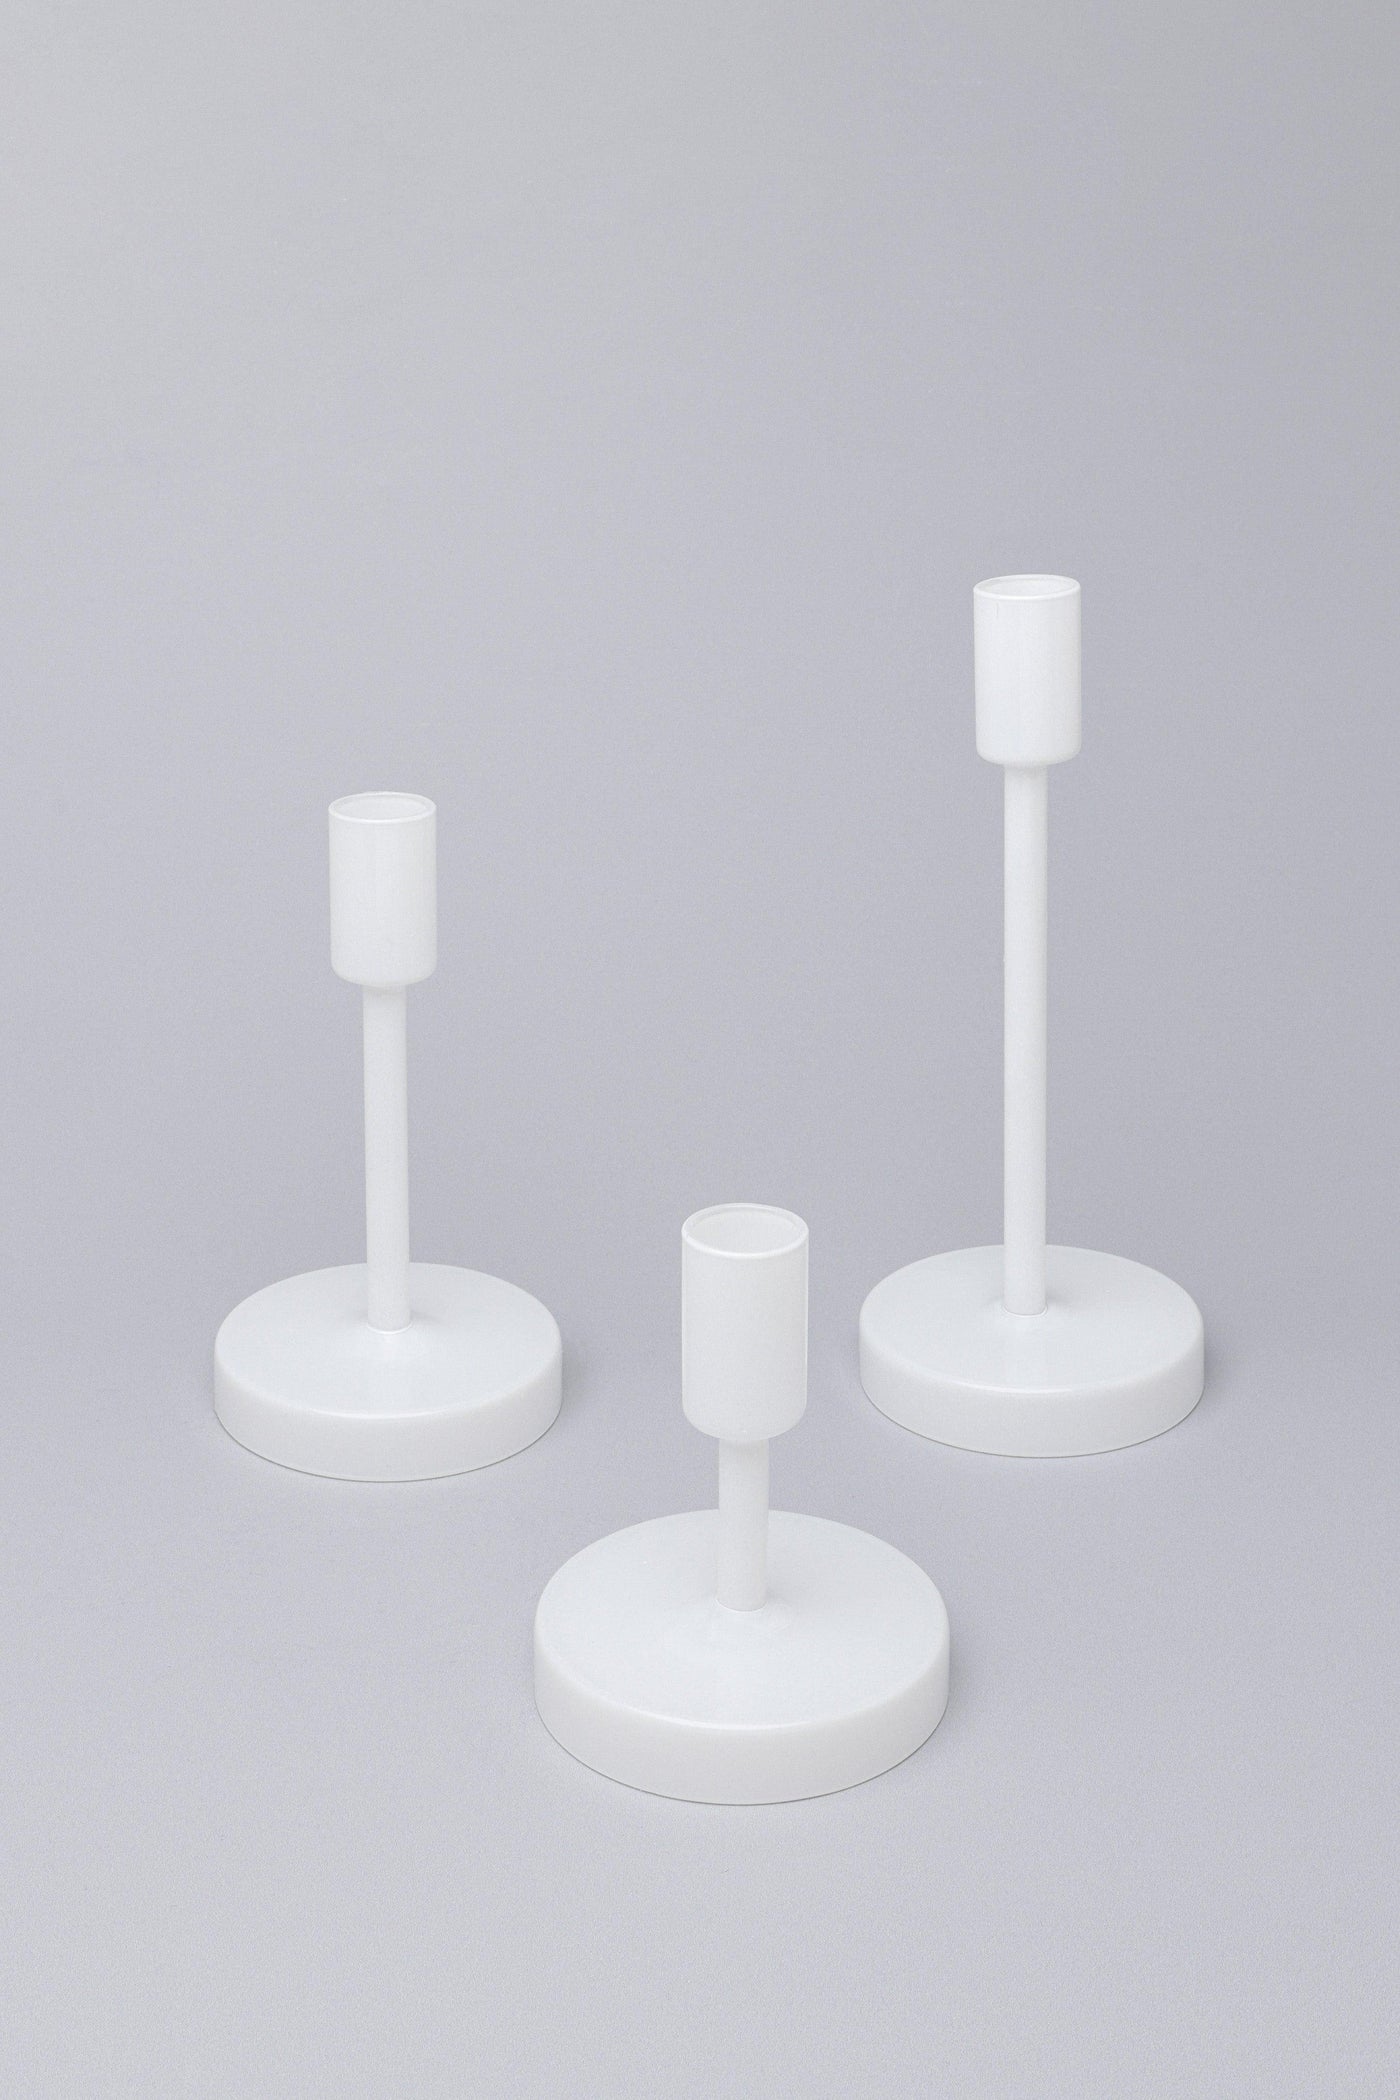 Gdecorstore Candles & Candle Holders White Set Of Three Scandi White Glass Classic Dinner Candlesticks Taper Church Candle Holders